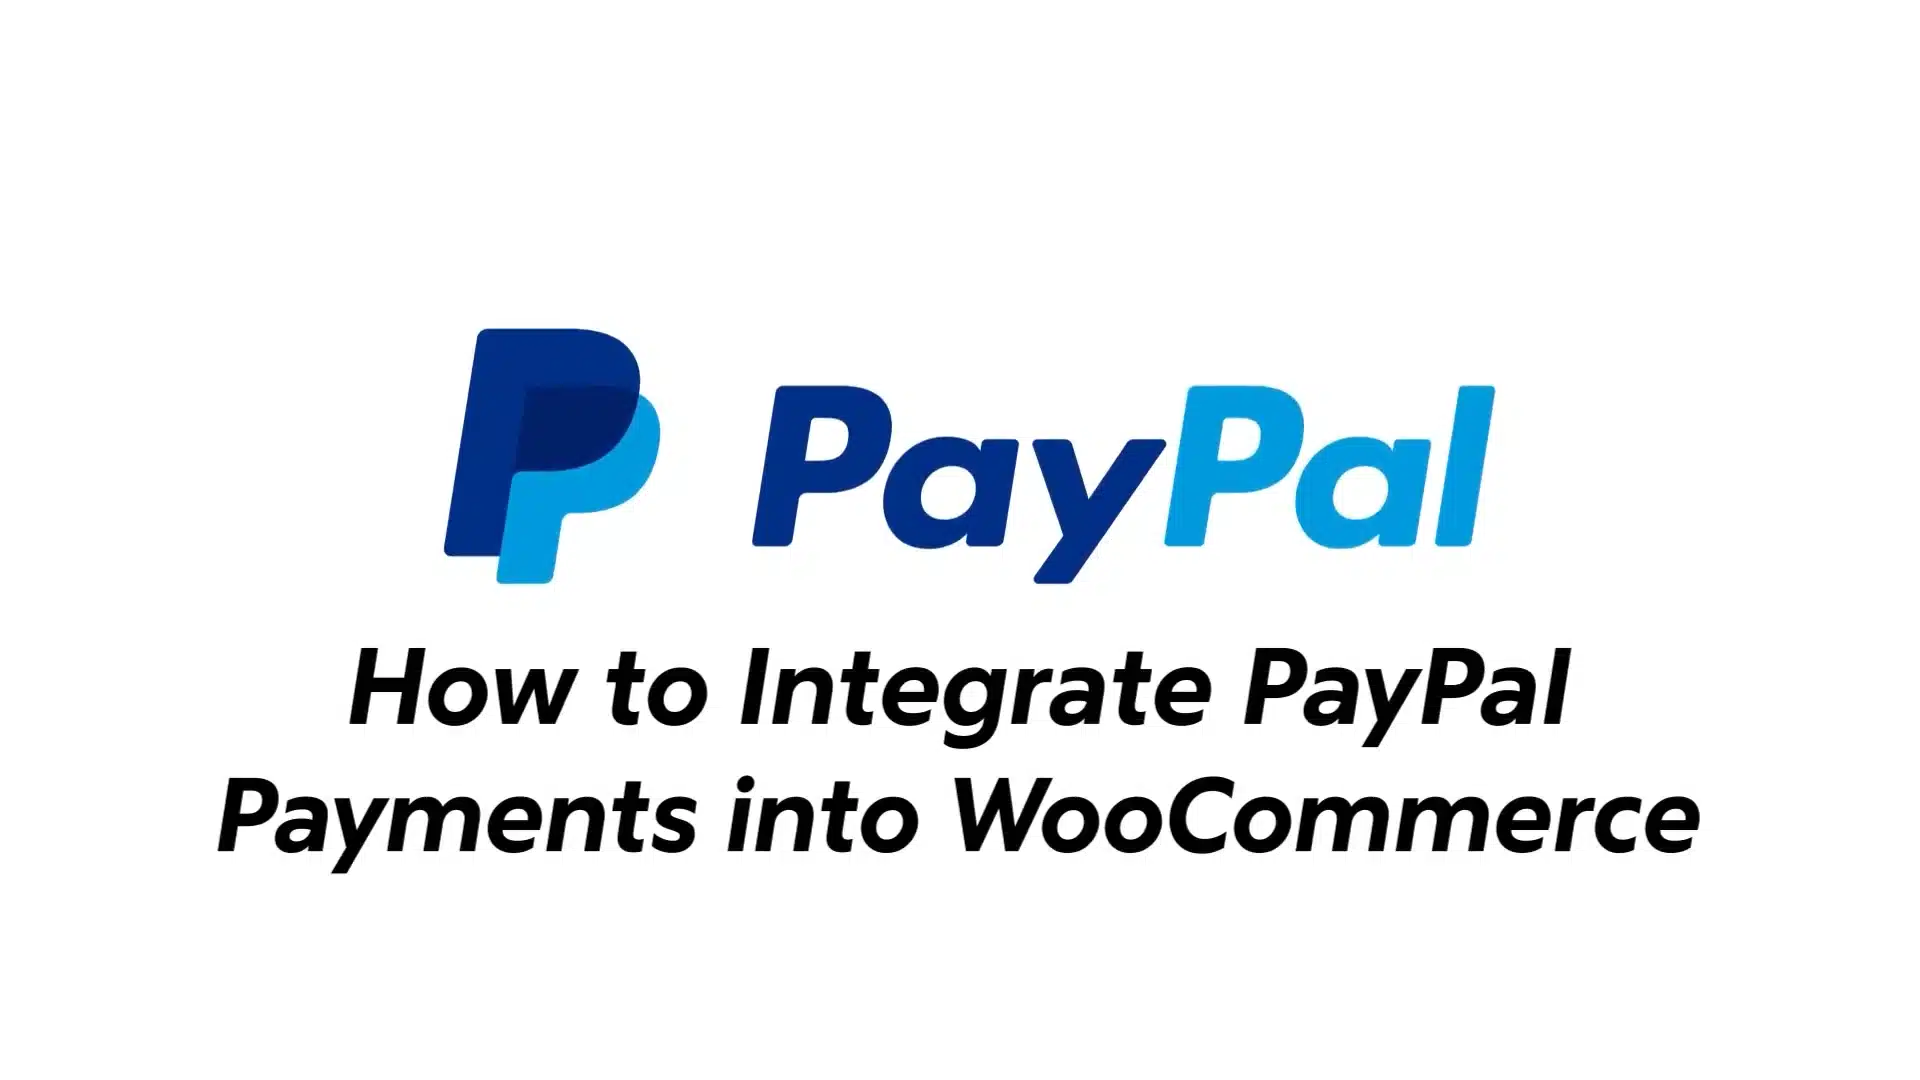 PayPal Payments into WooCommerce